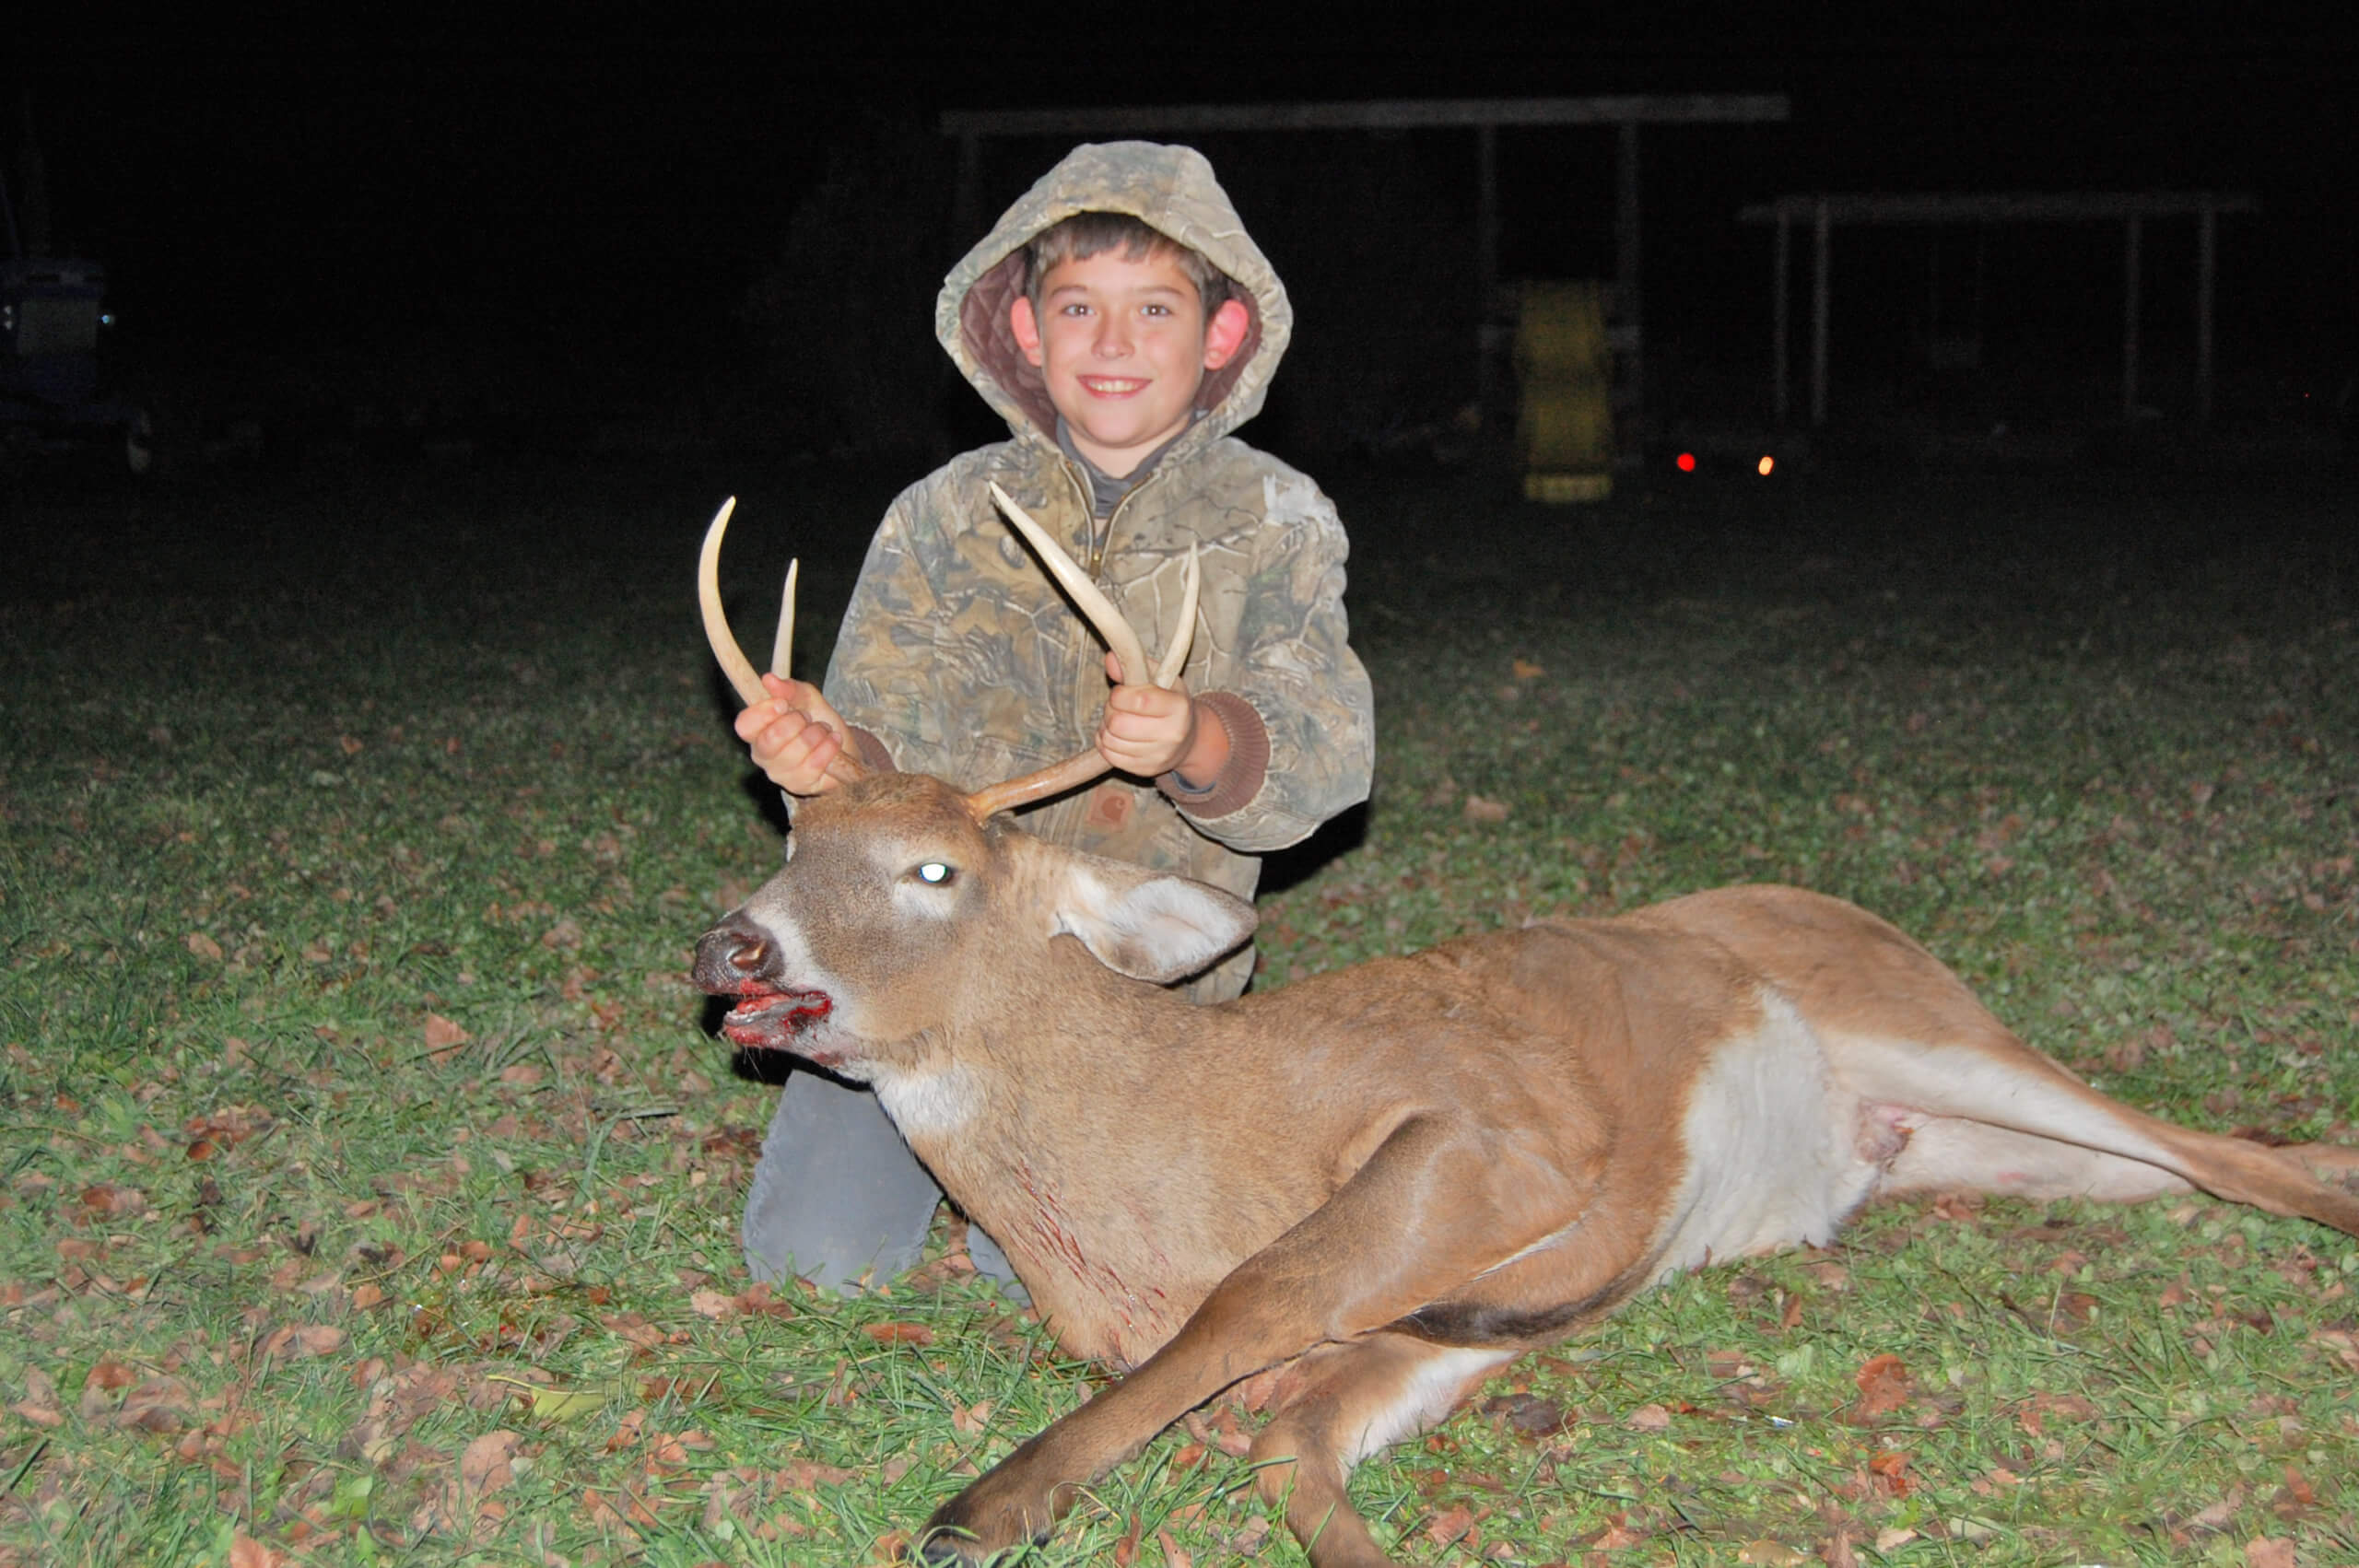 Ten-year-old Franklin Donegan got his first deer this season. The deer weighed 144 pounds and was harvested from his family’s farm in Hinesburg. Franklin lives in Charlotte and attends Charlotte Central School. Photo contributed